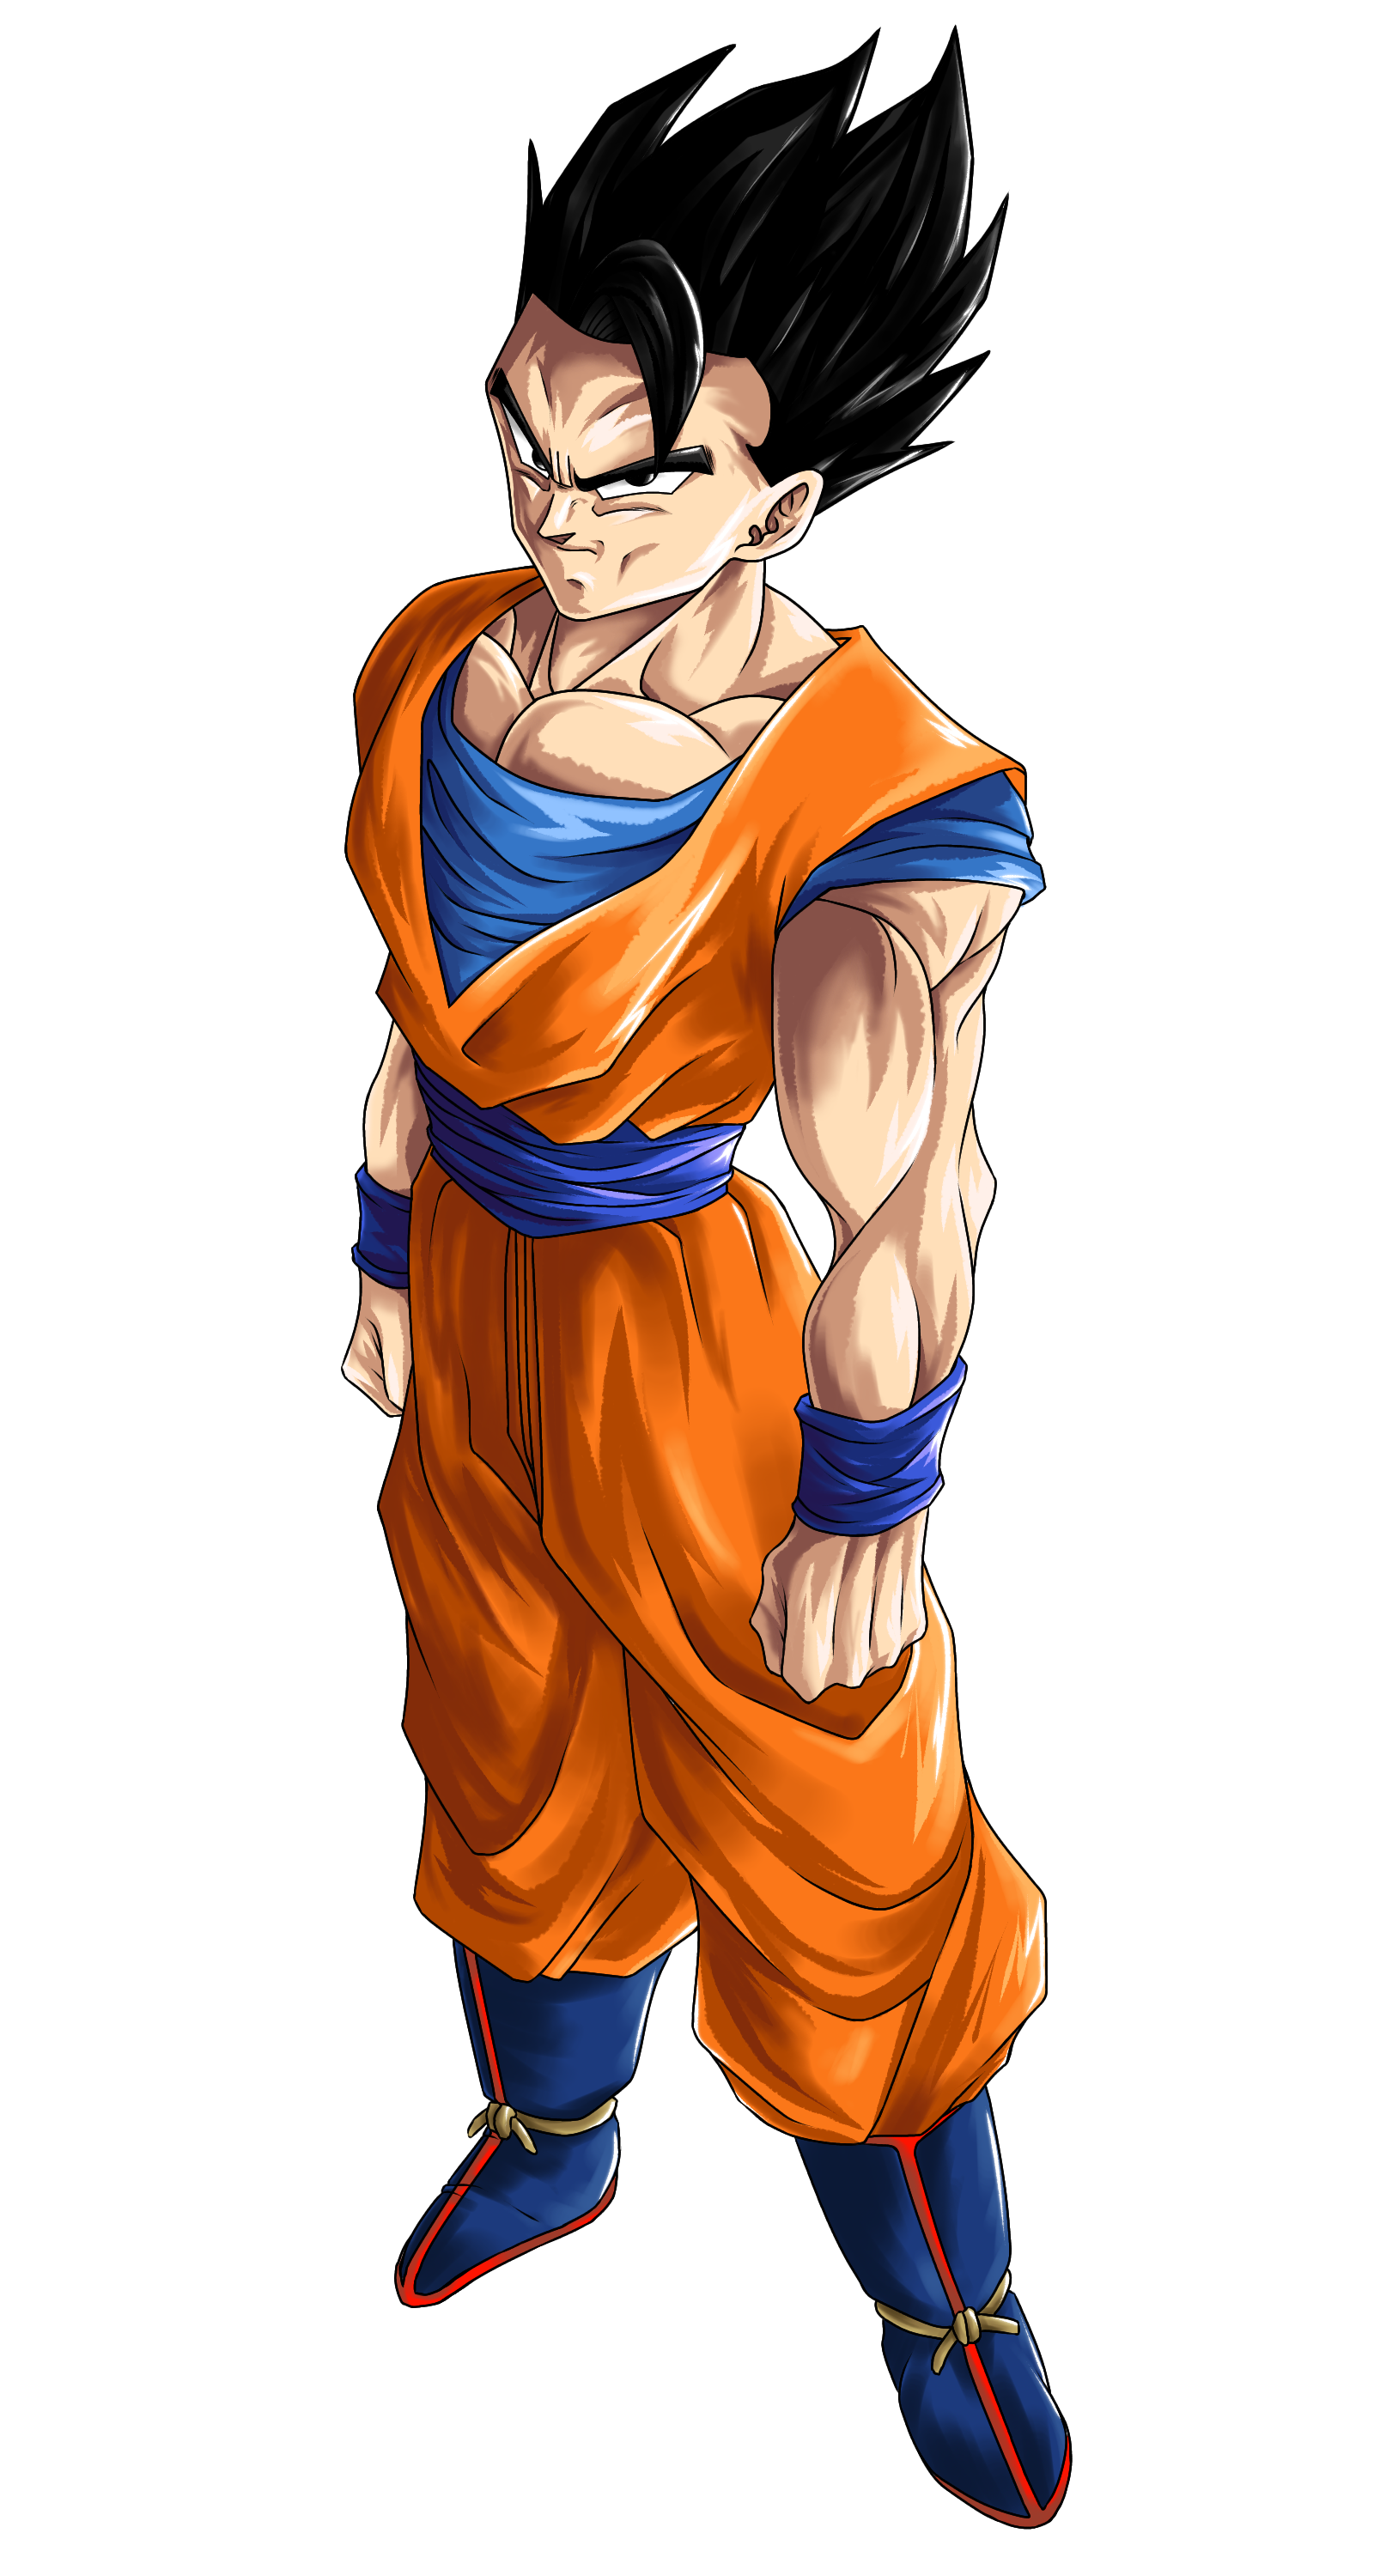 LL Ultimate Gohan by cxnvectixn on DeviantArt